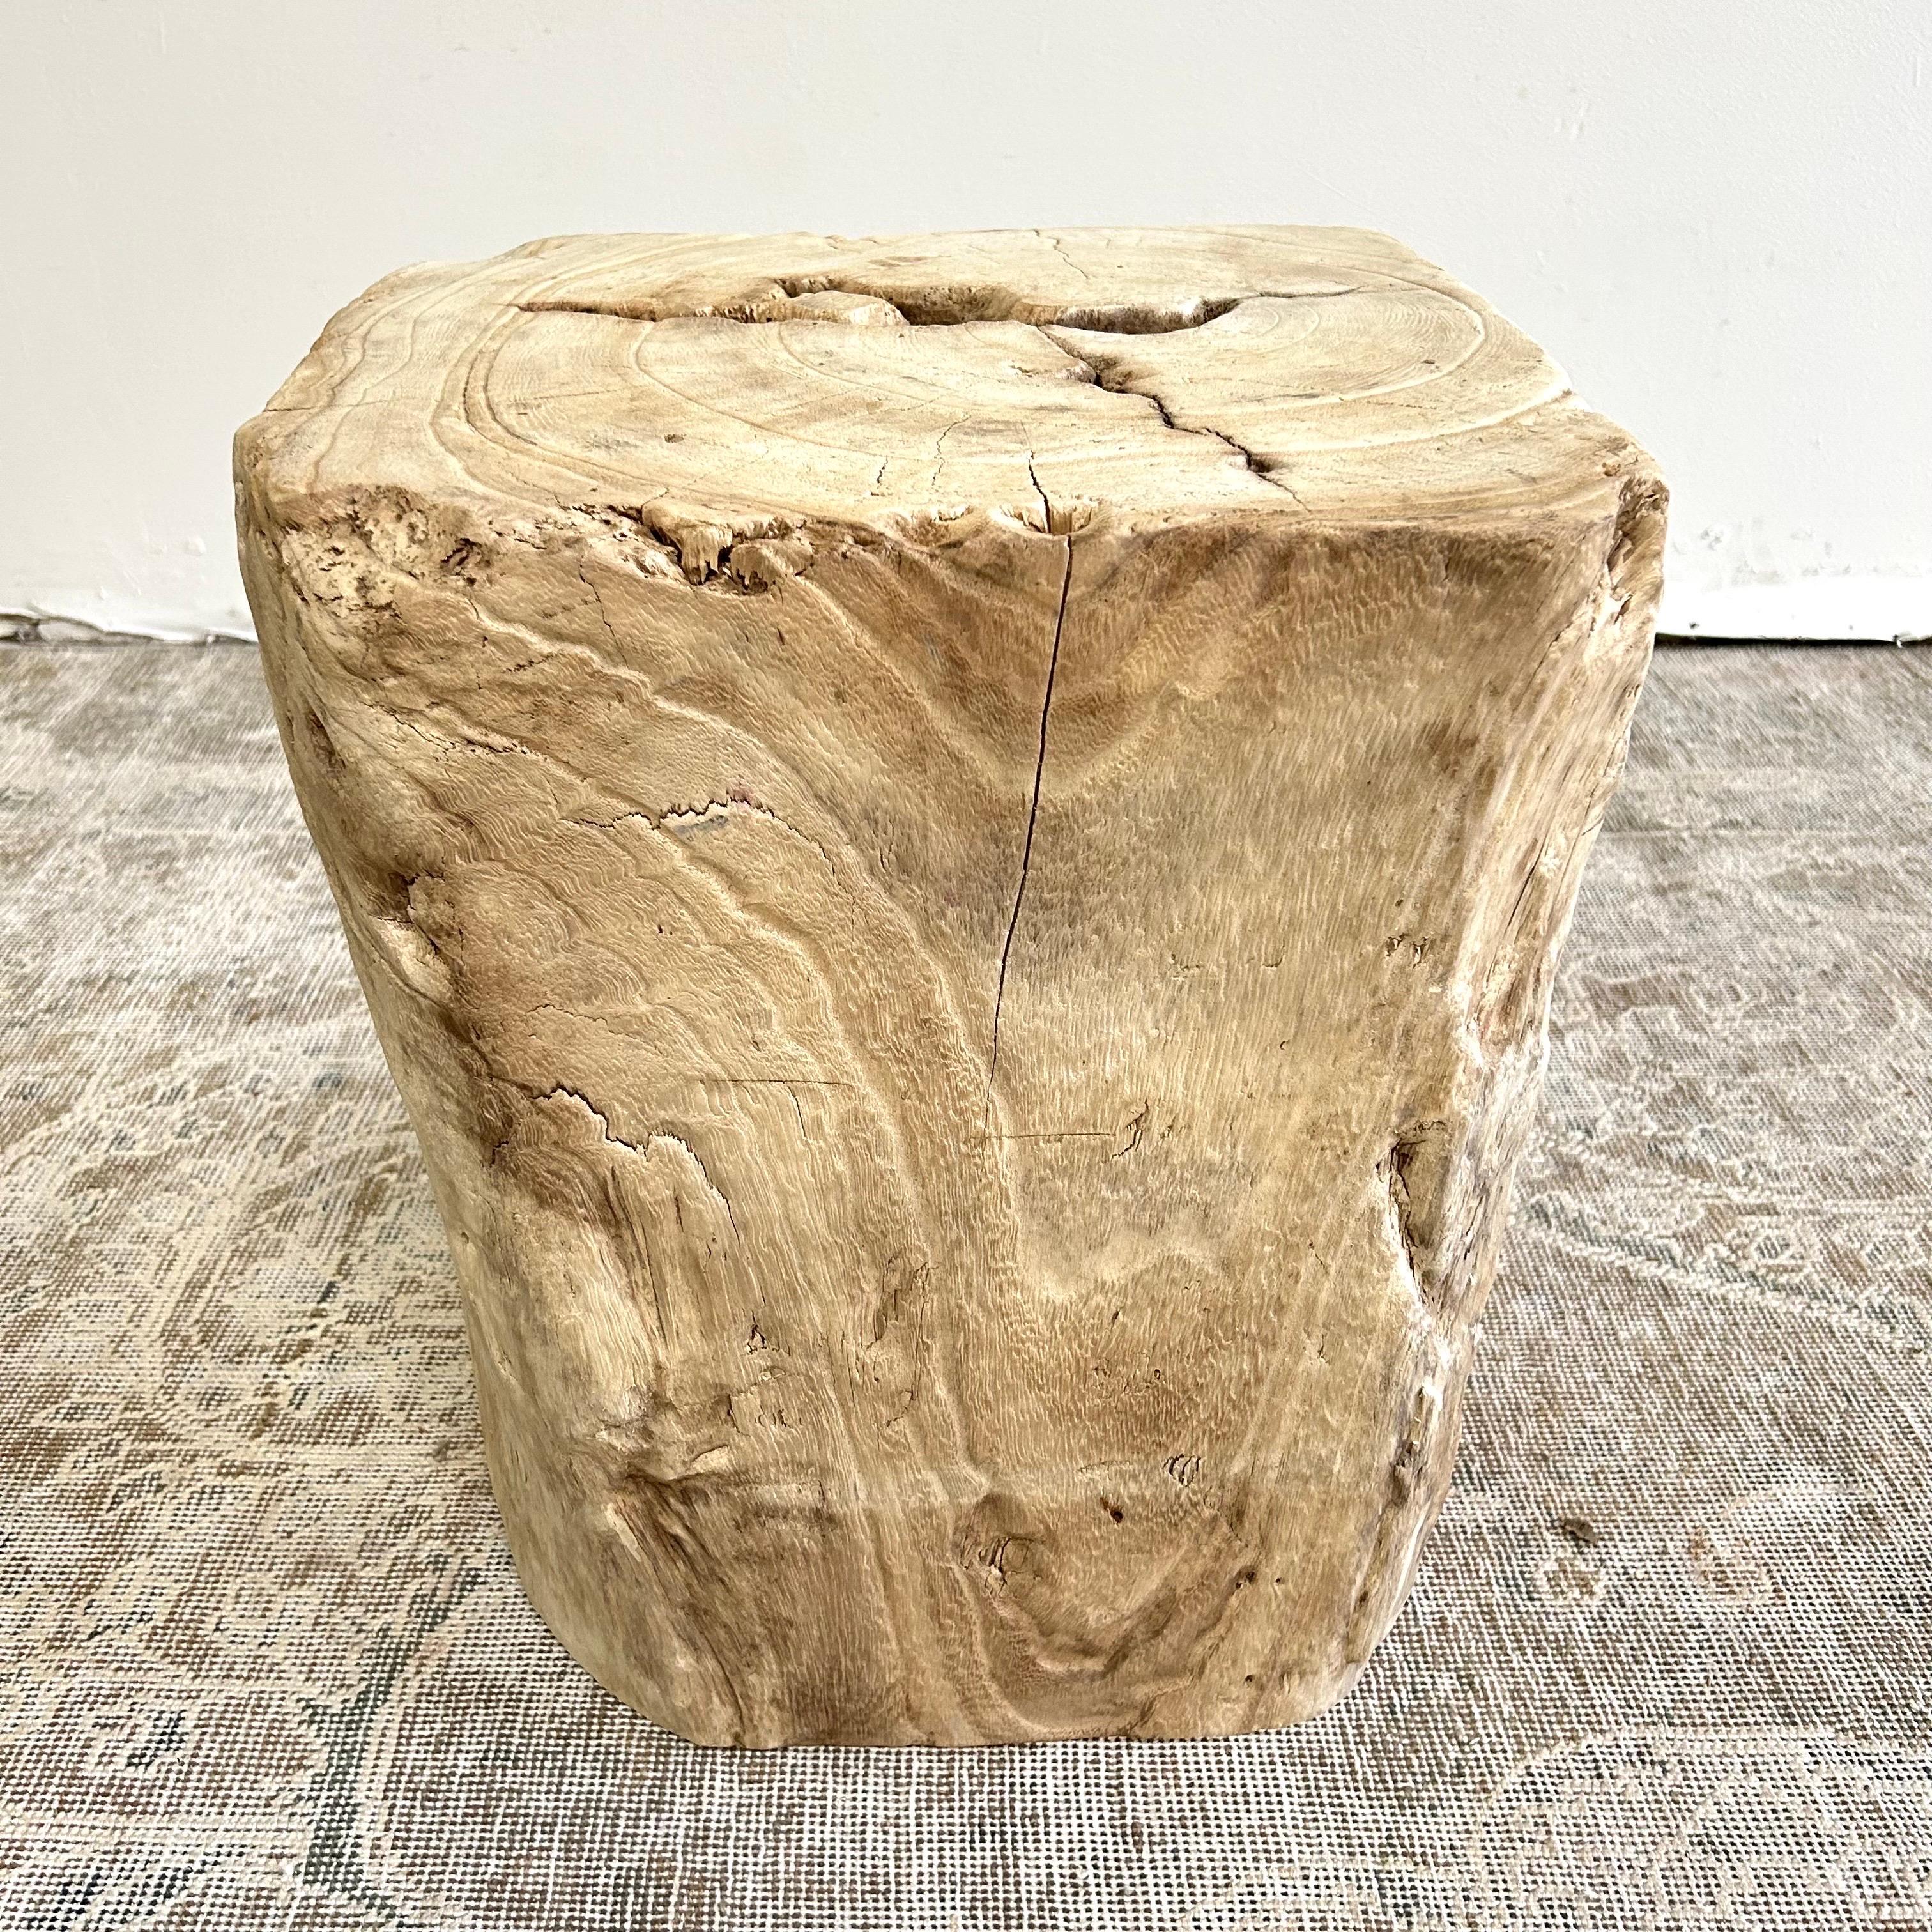 Natural wood side table stump. Beautiful solid stump, great for use as a side table, drink table, or bath. A great architectural accent for any room. This stump has very unique characteristics, grooves, and movement. Solid sturdy, ready for daily